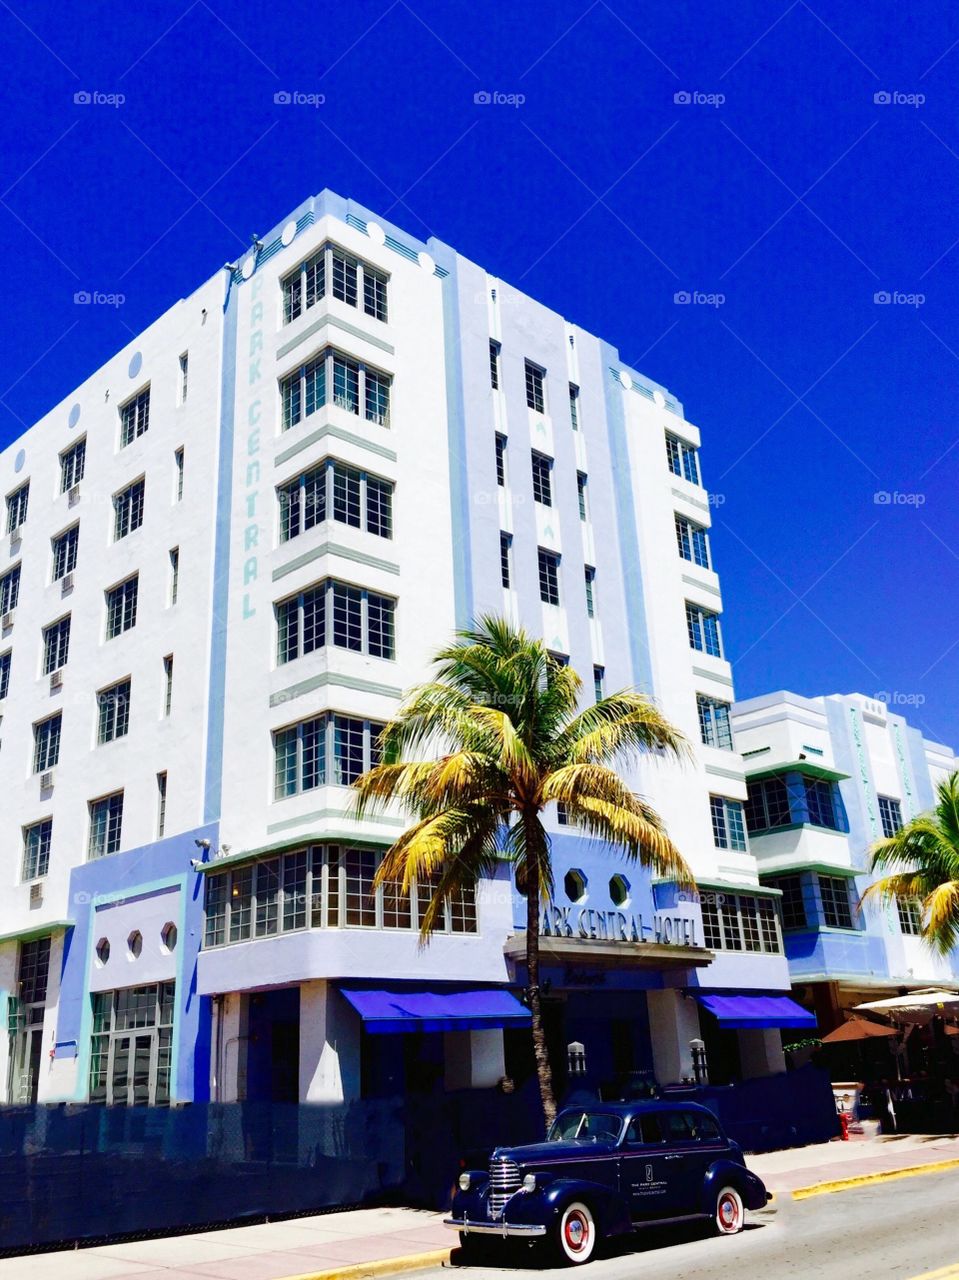 Miami South Beach. Ocean drive old car and building 